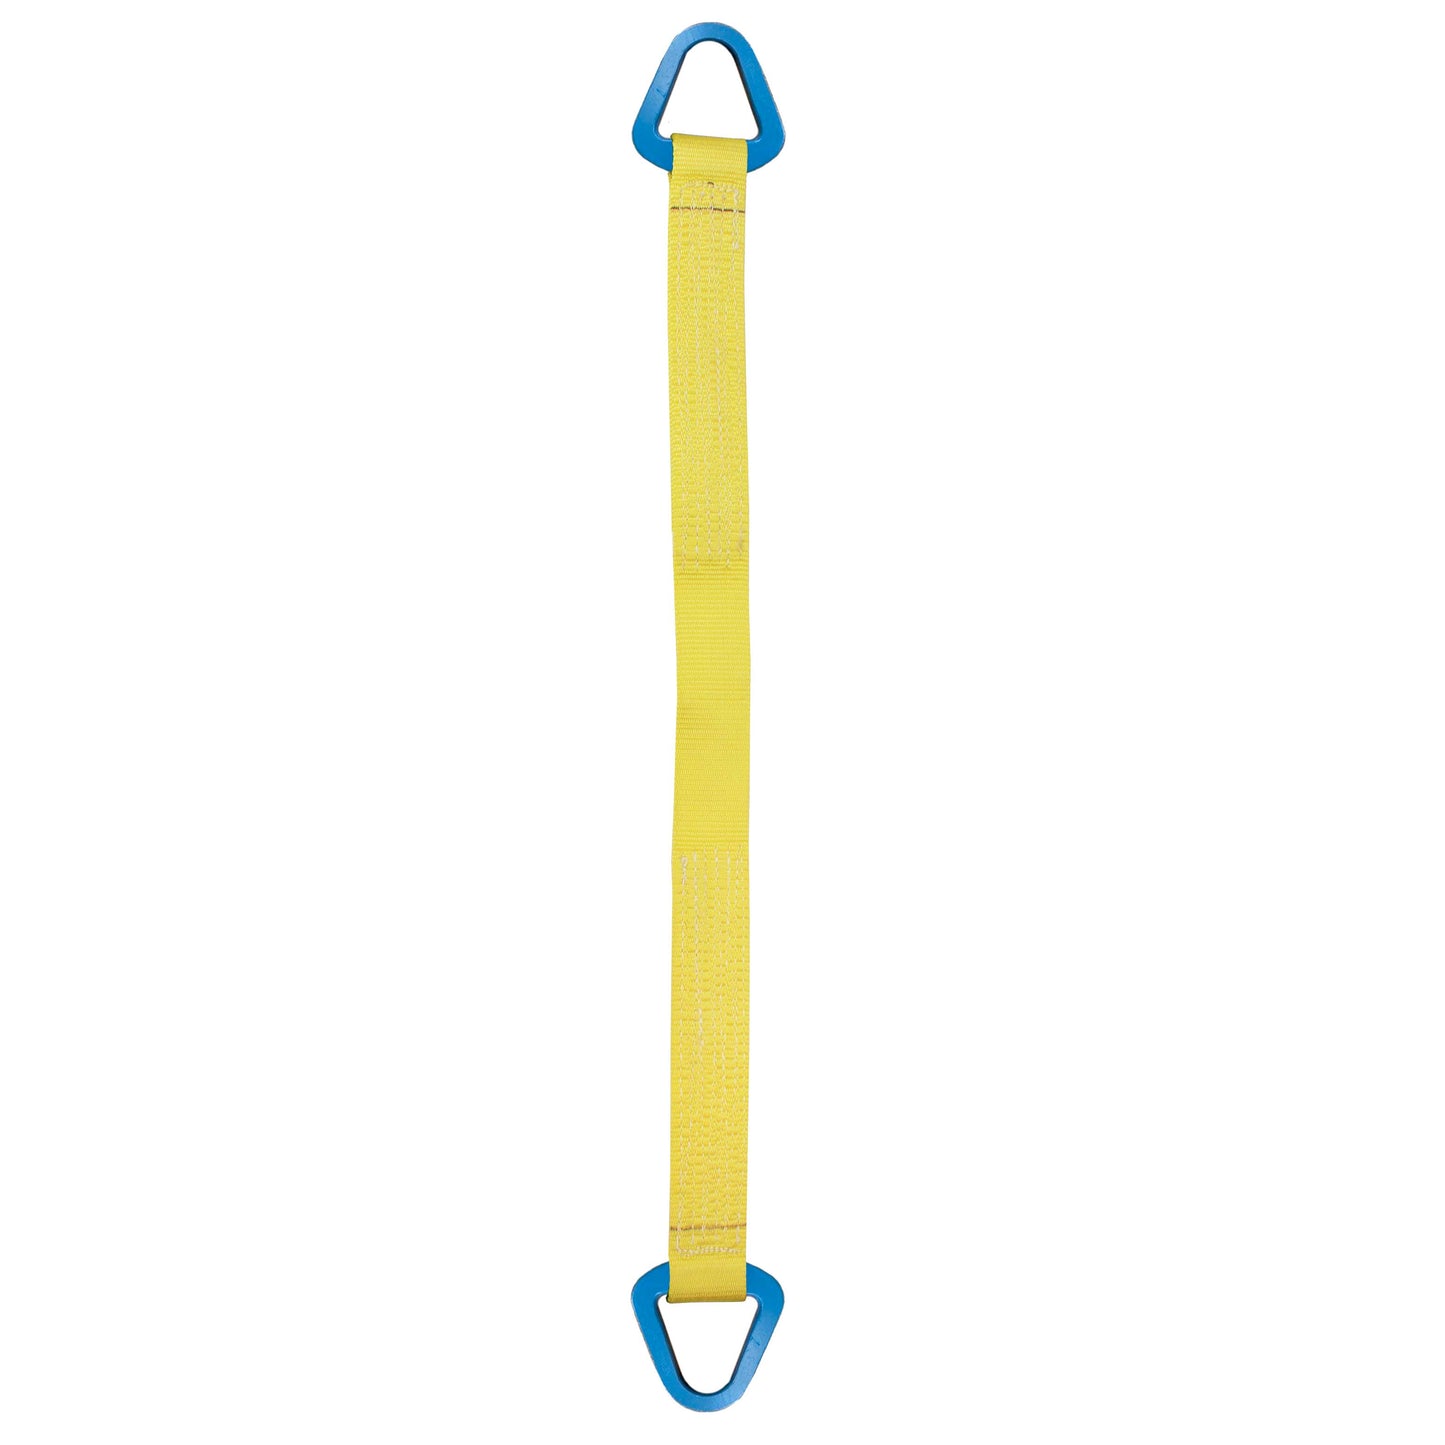 Nylon Lifting Sling Triangle 8 inch x 10 foot 2ply image 1 of 2